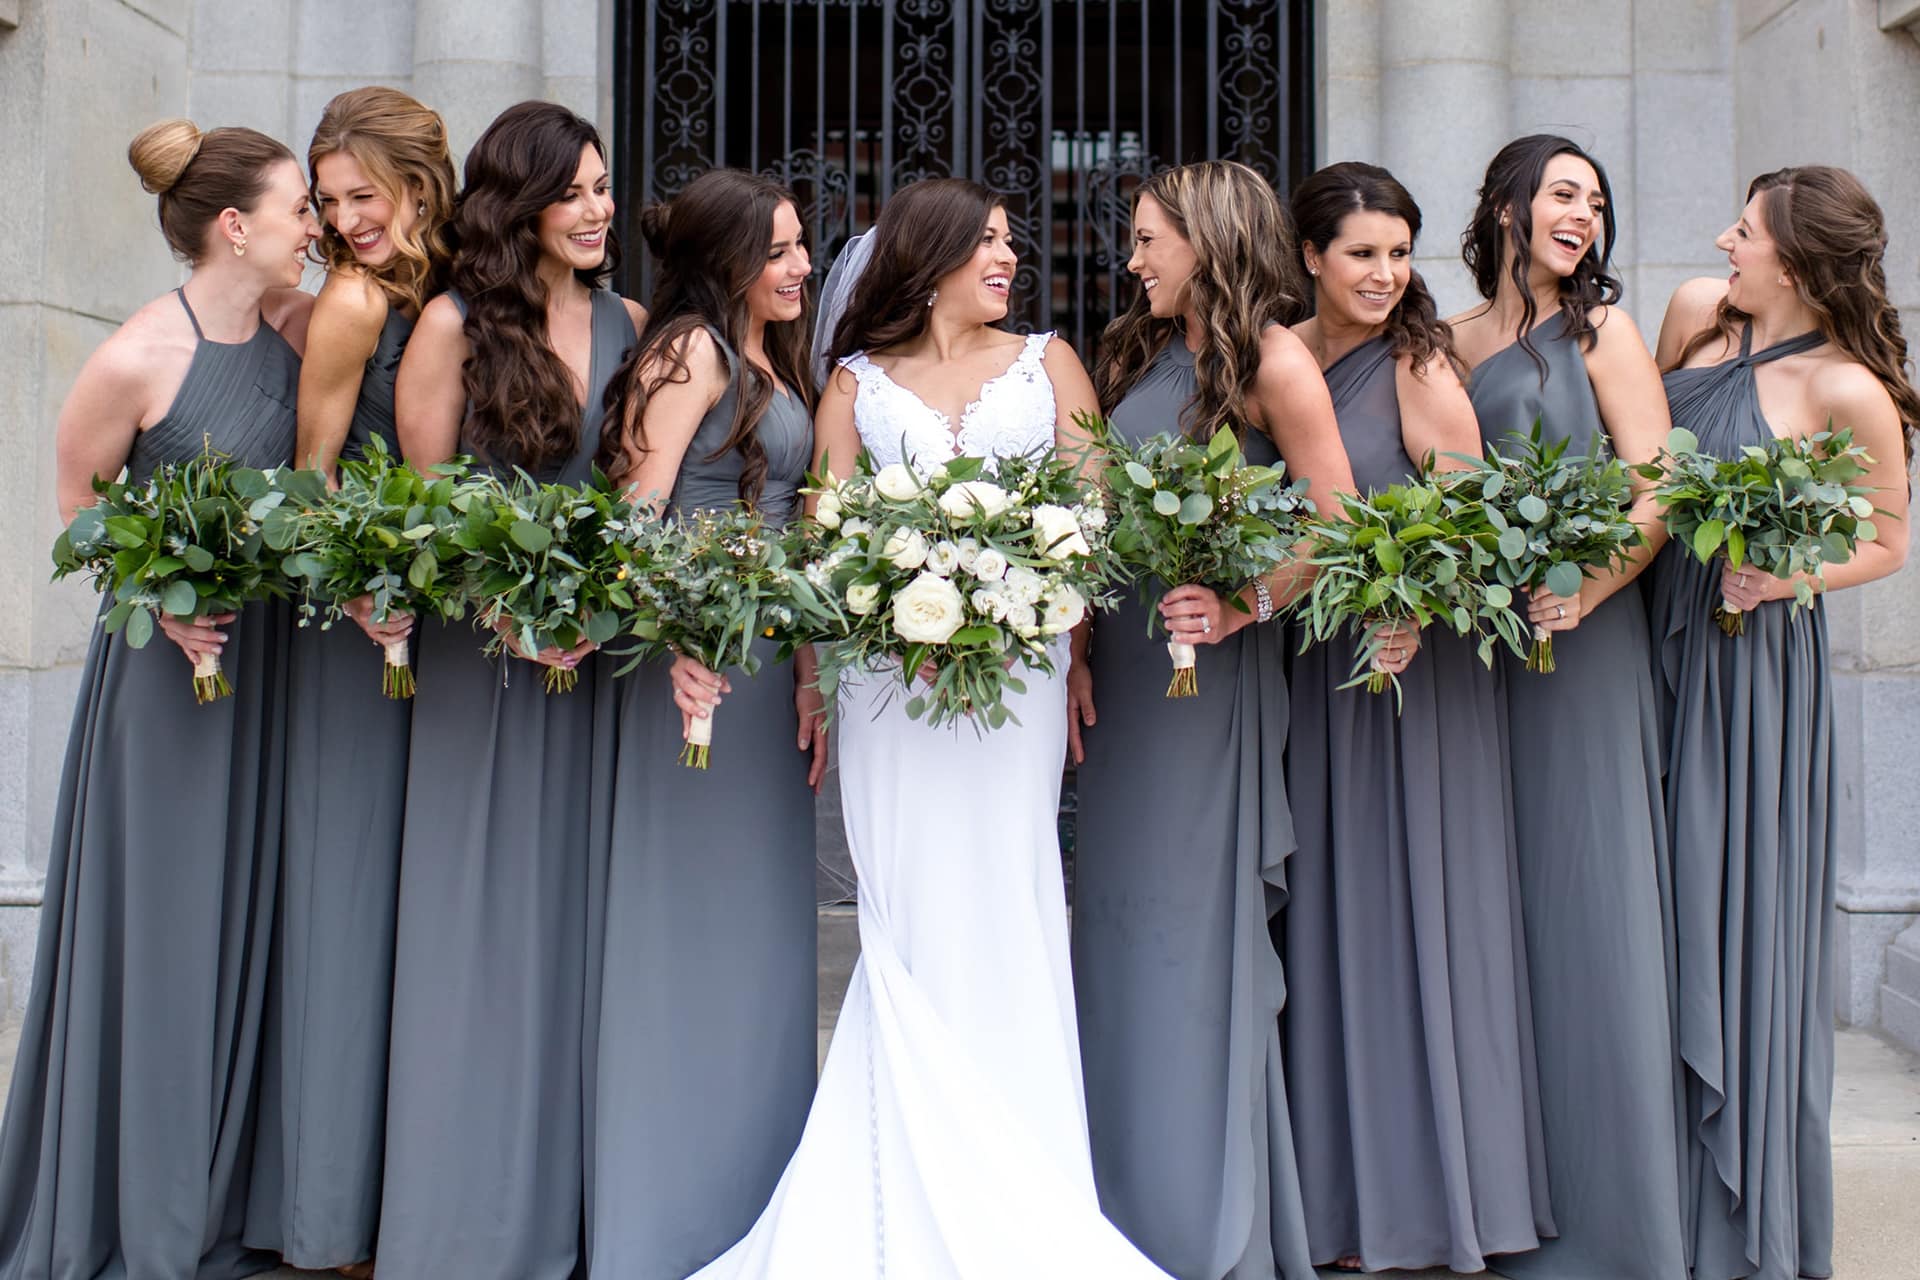 Bridesmaids in gray and white florals